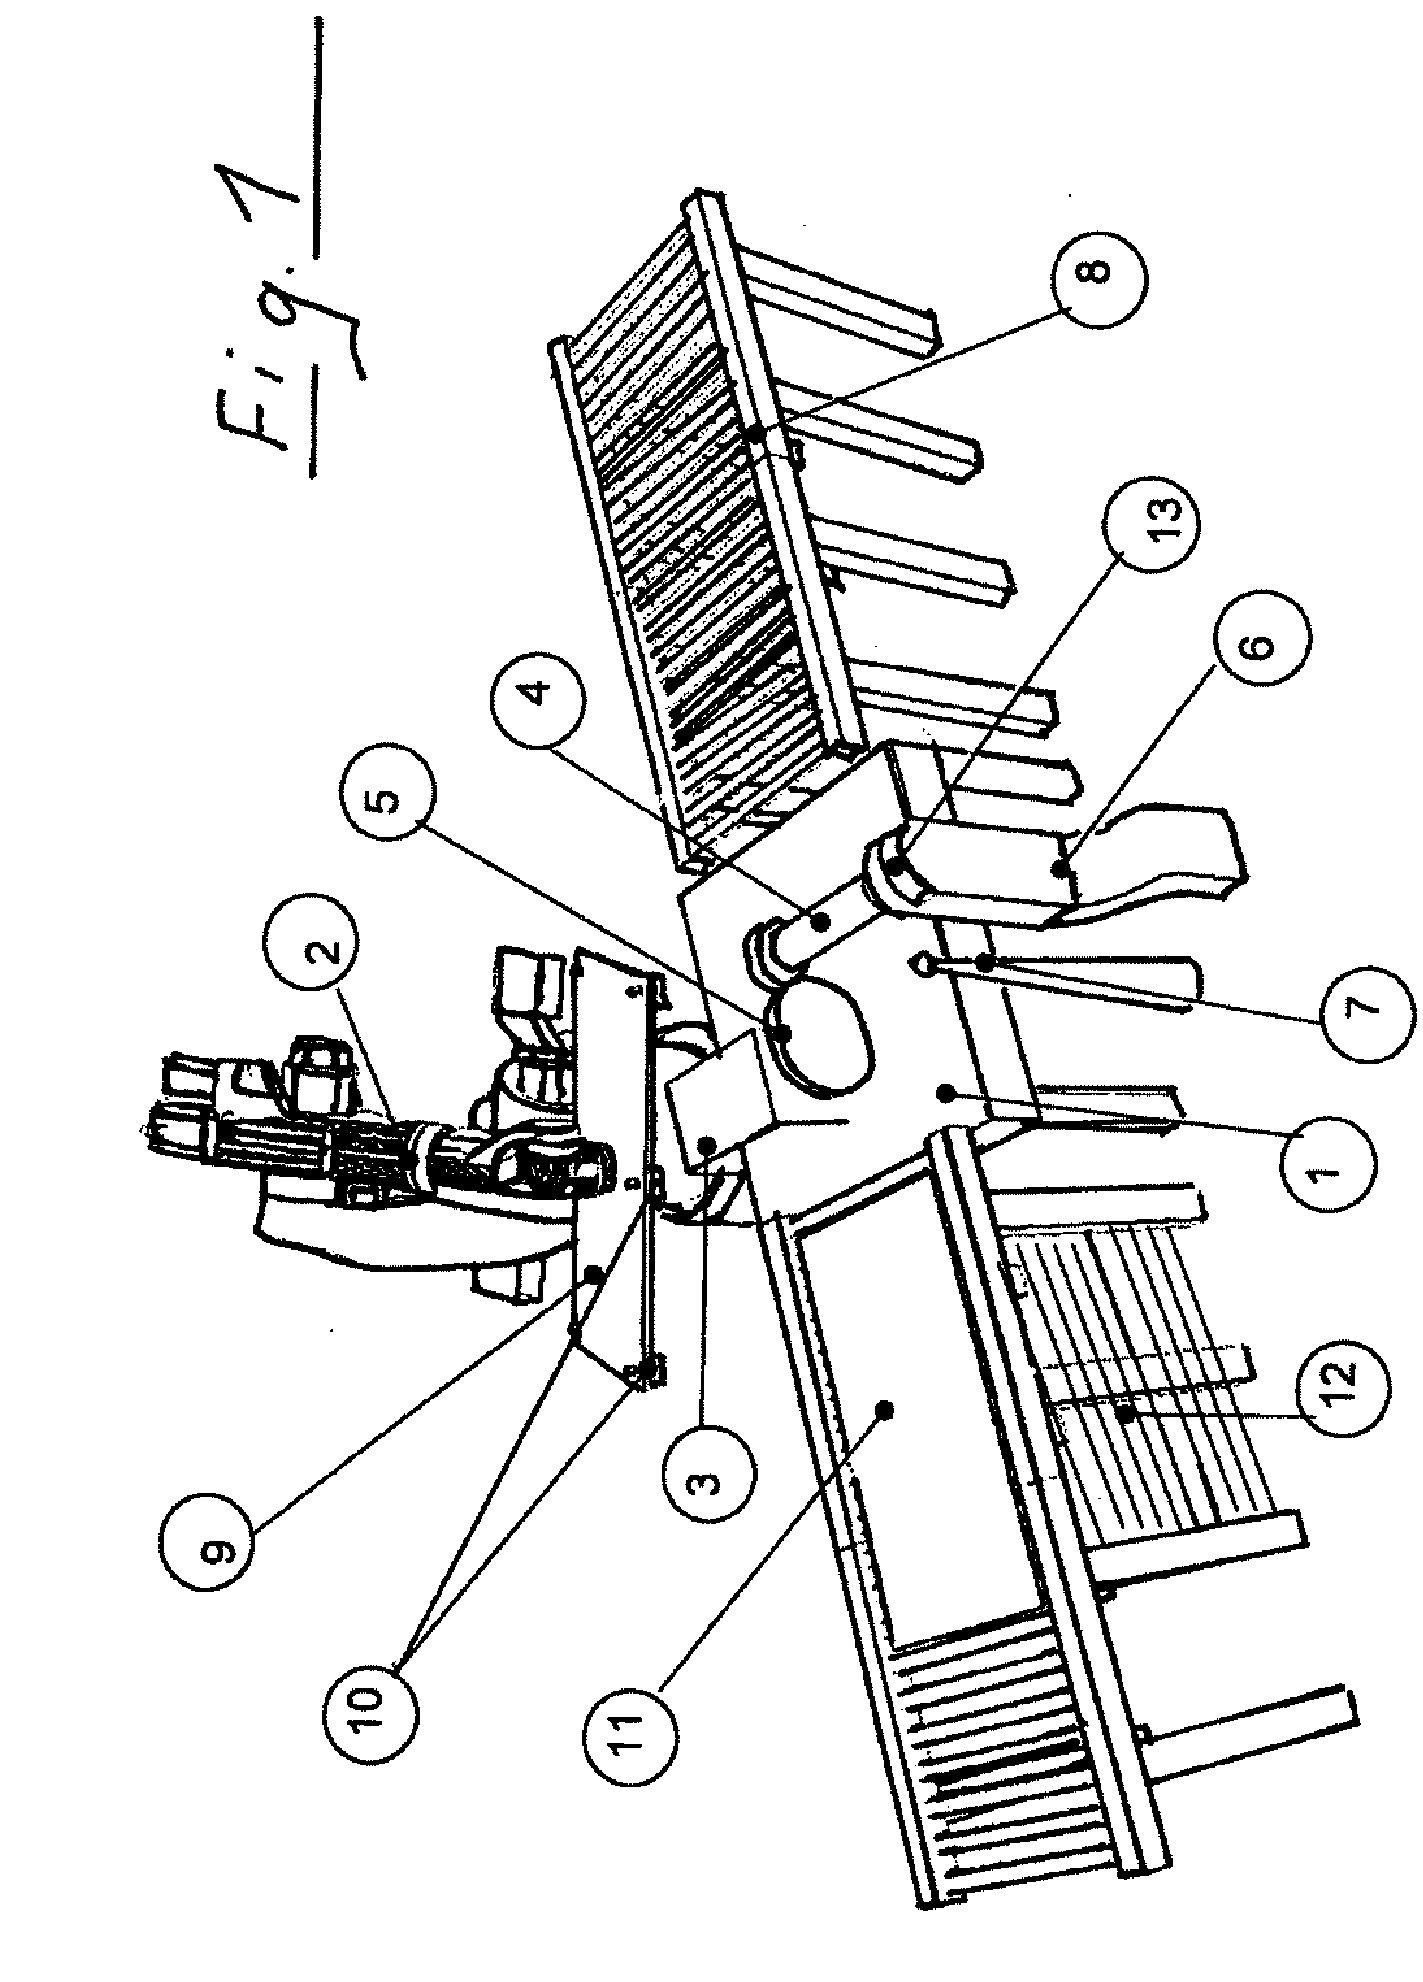 Process and Apparatus for Automatically Grinding Edges of Glass Sheets Under Clean Room Conditions